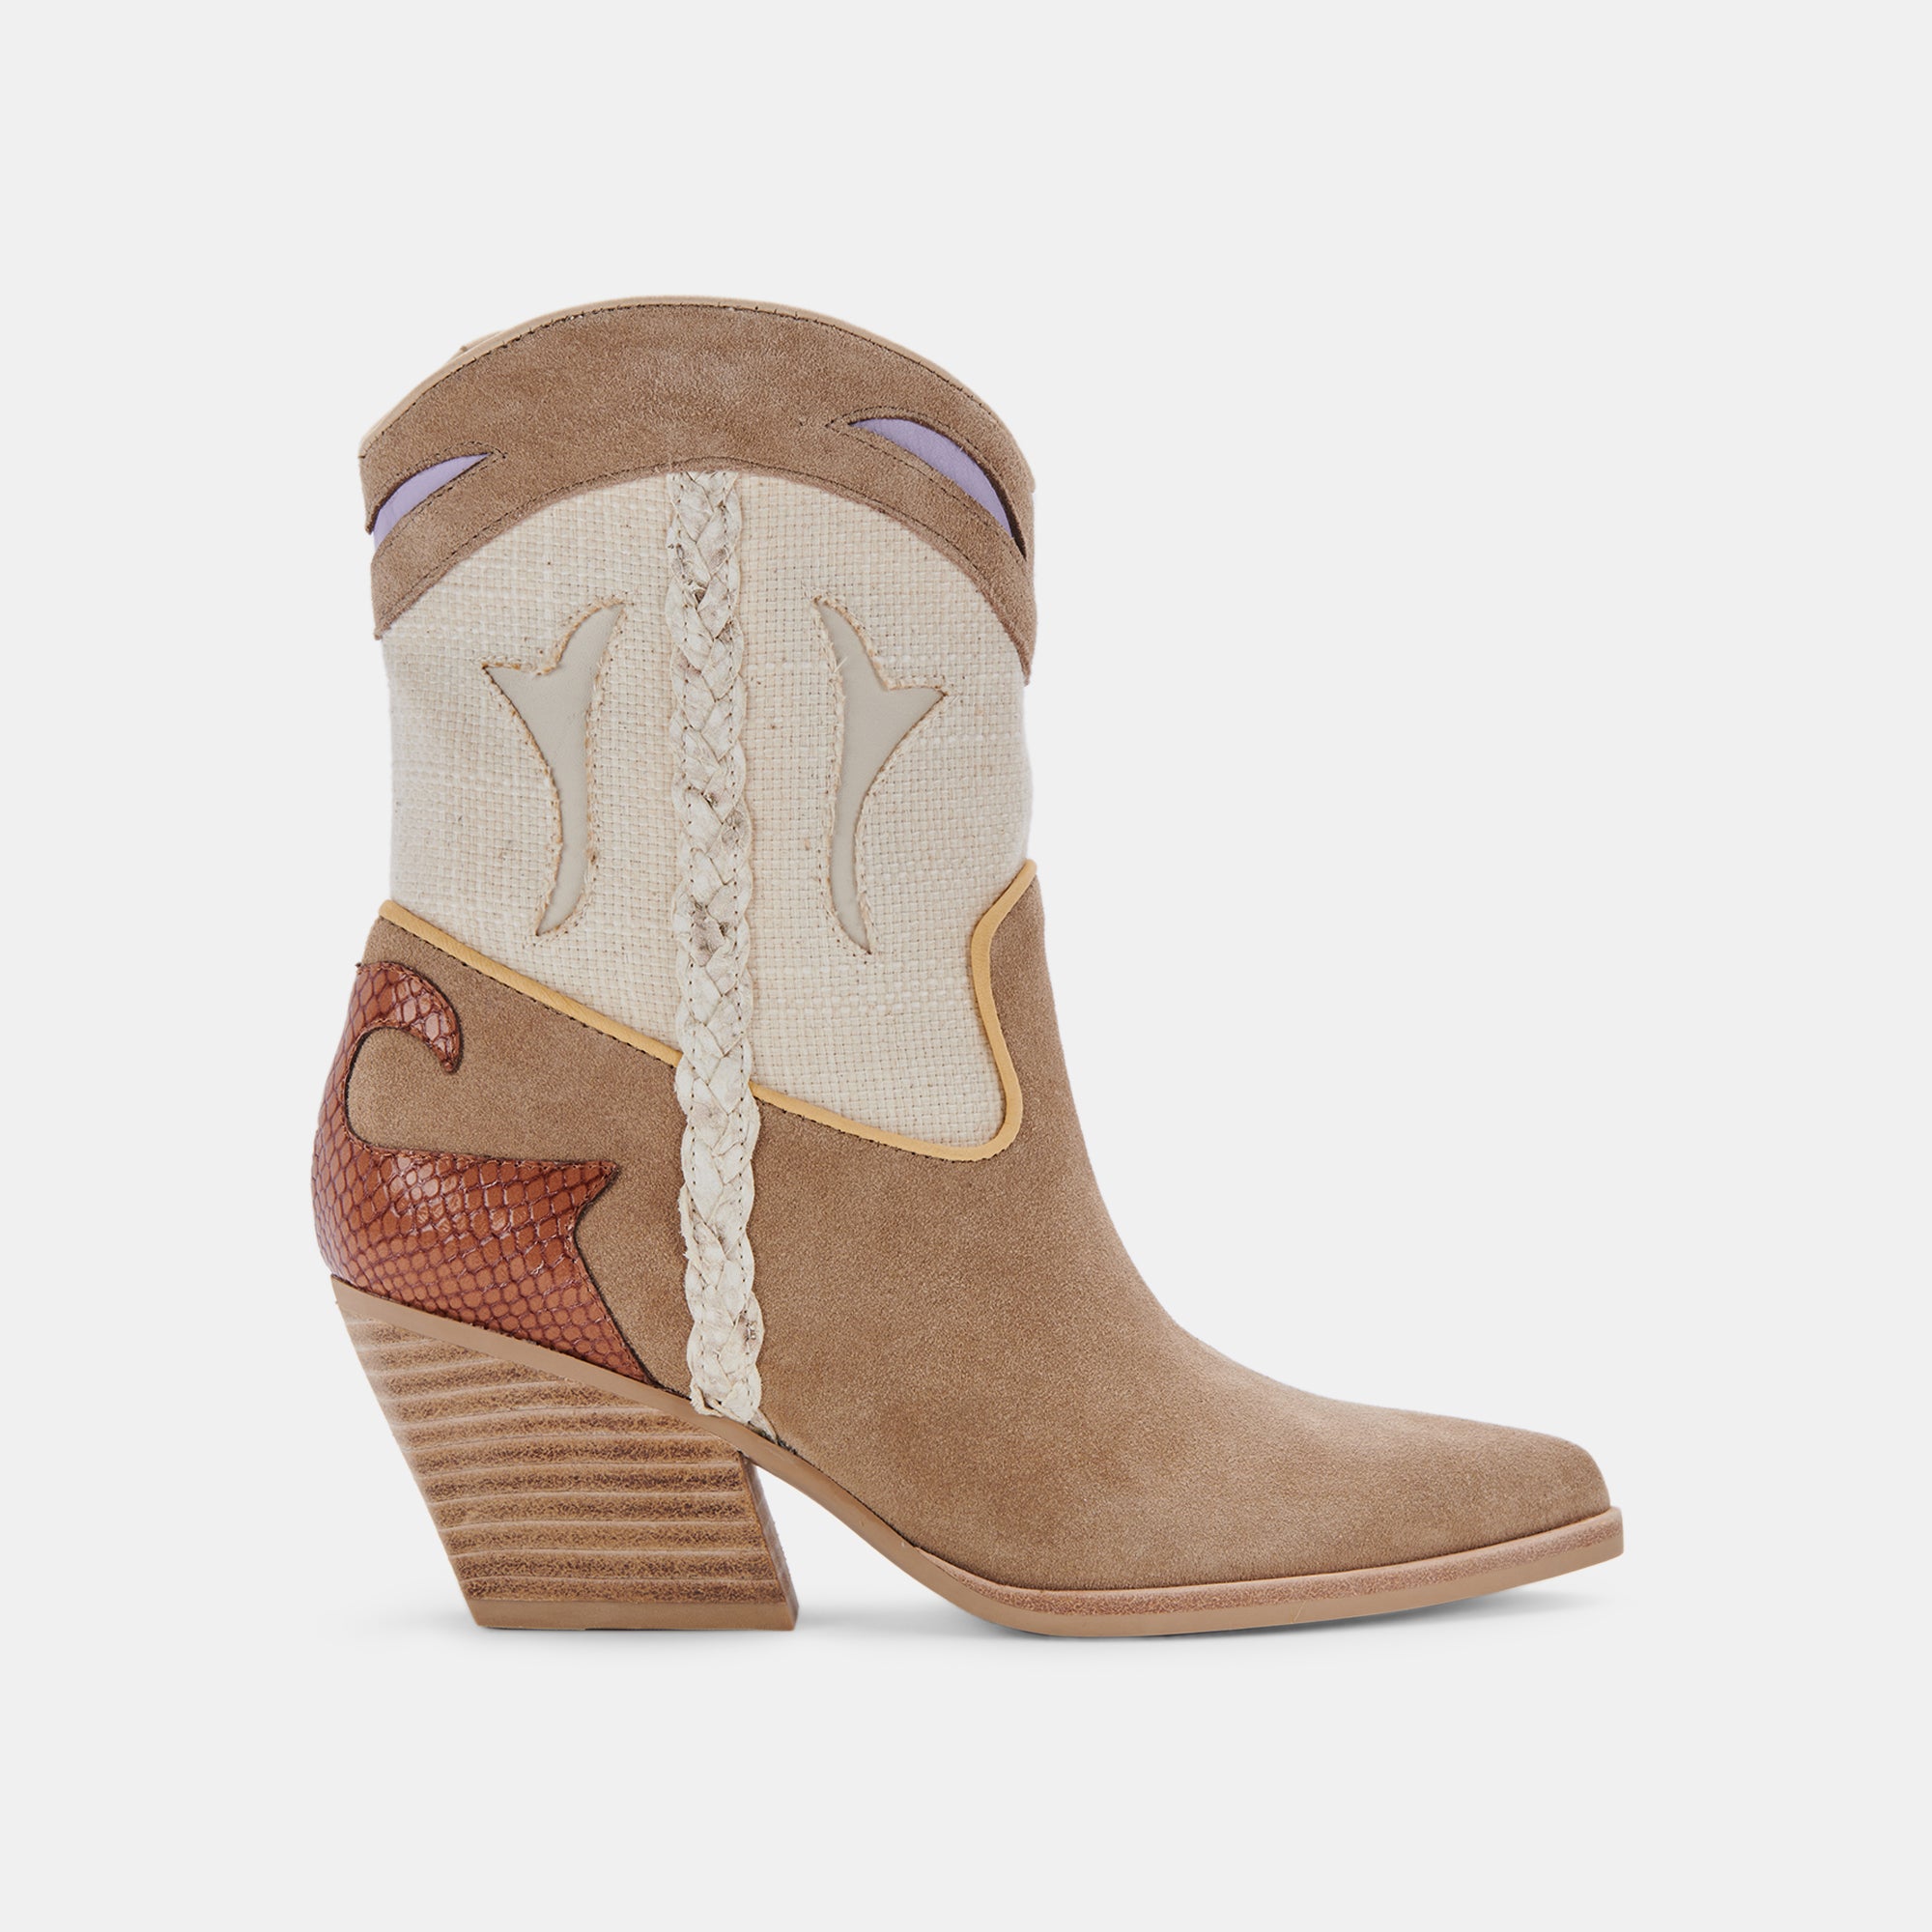 loral booties taupe multi suede